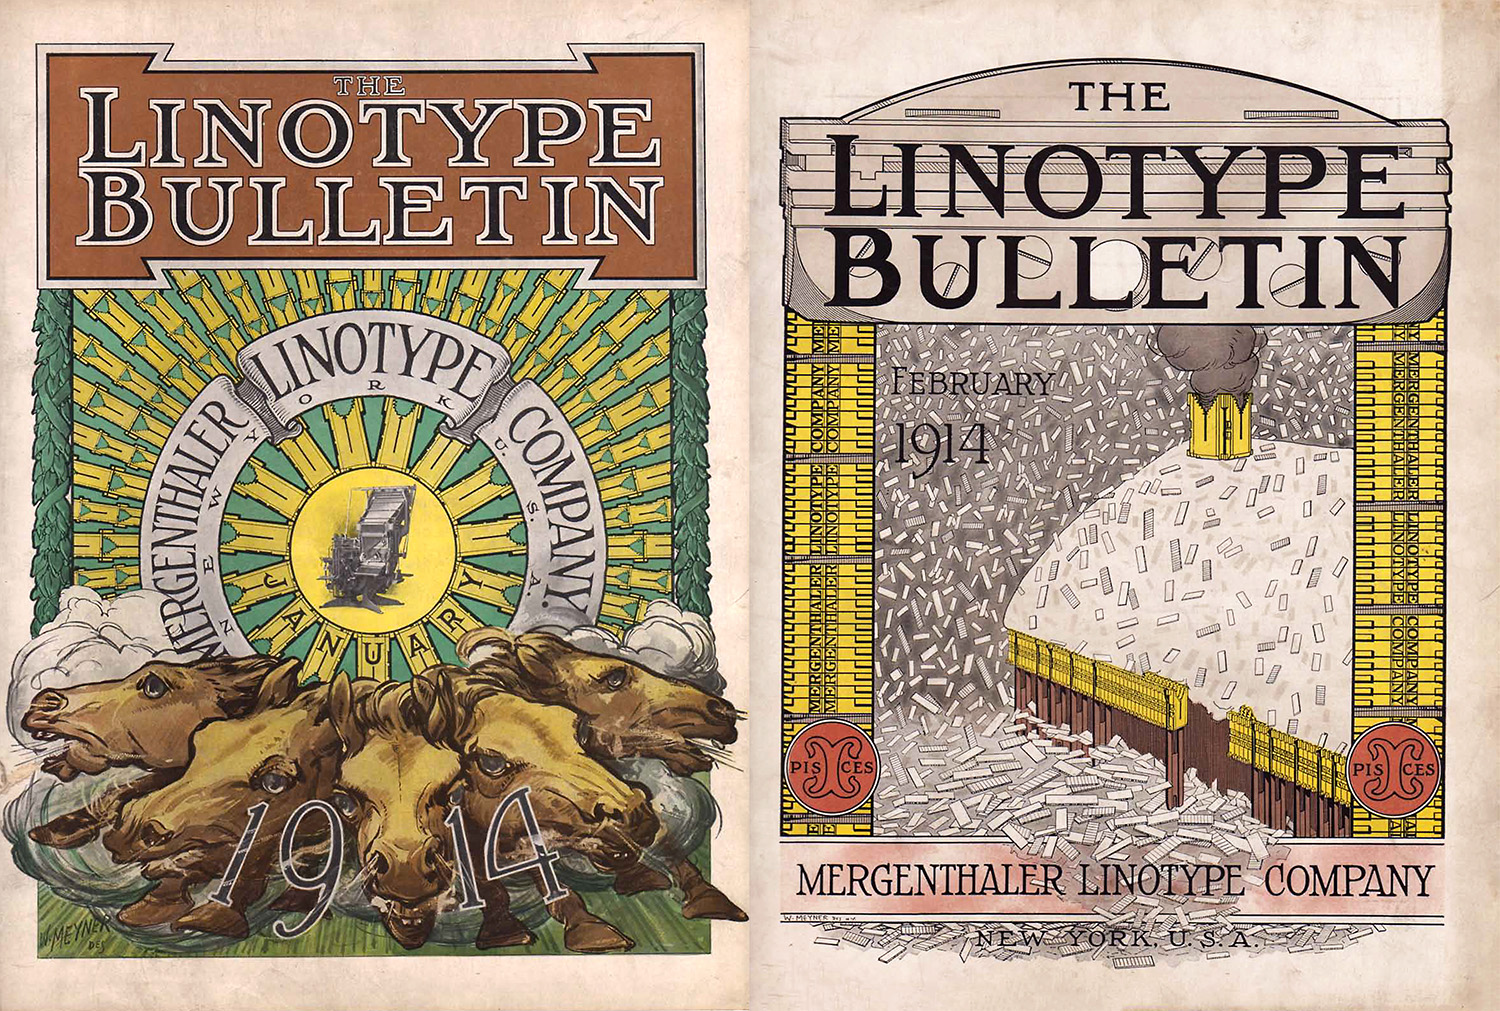 Covers from January & February 1914 (click to enlarge)